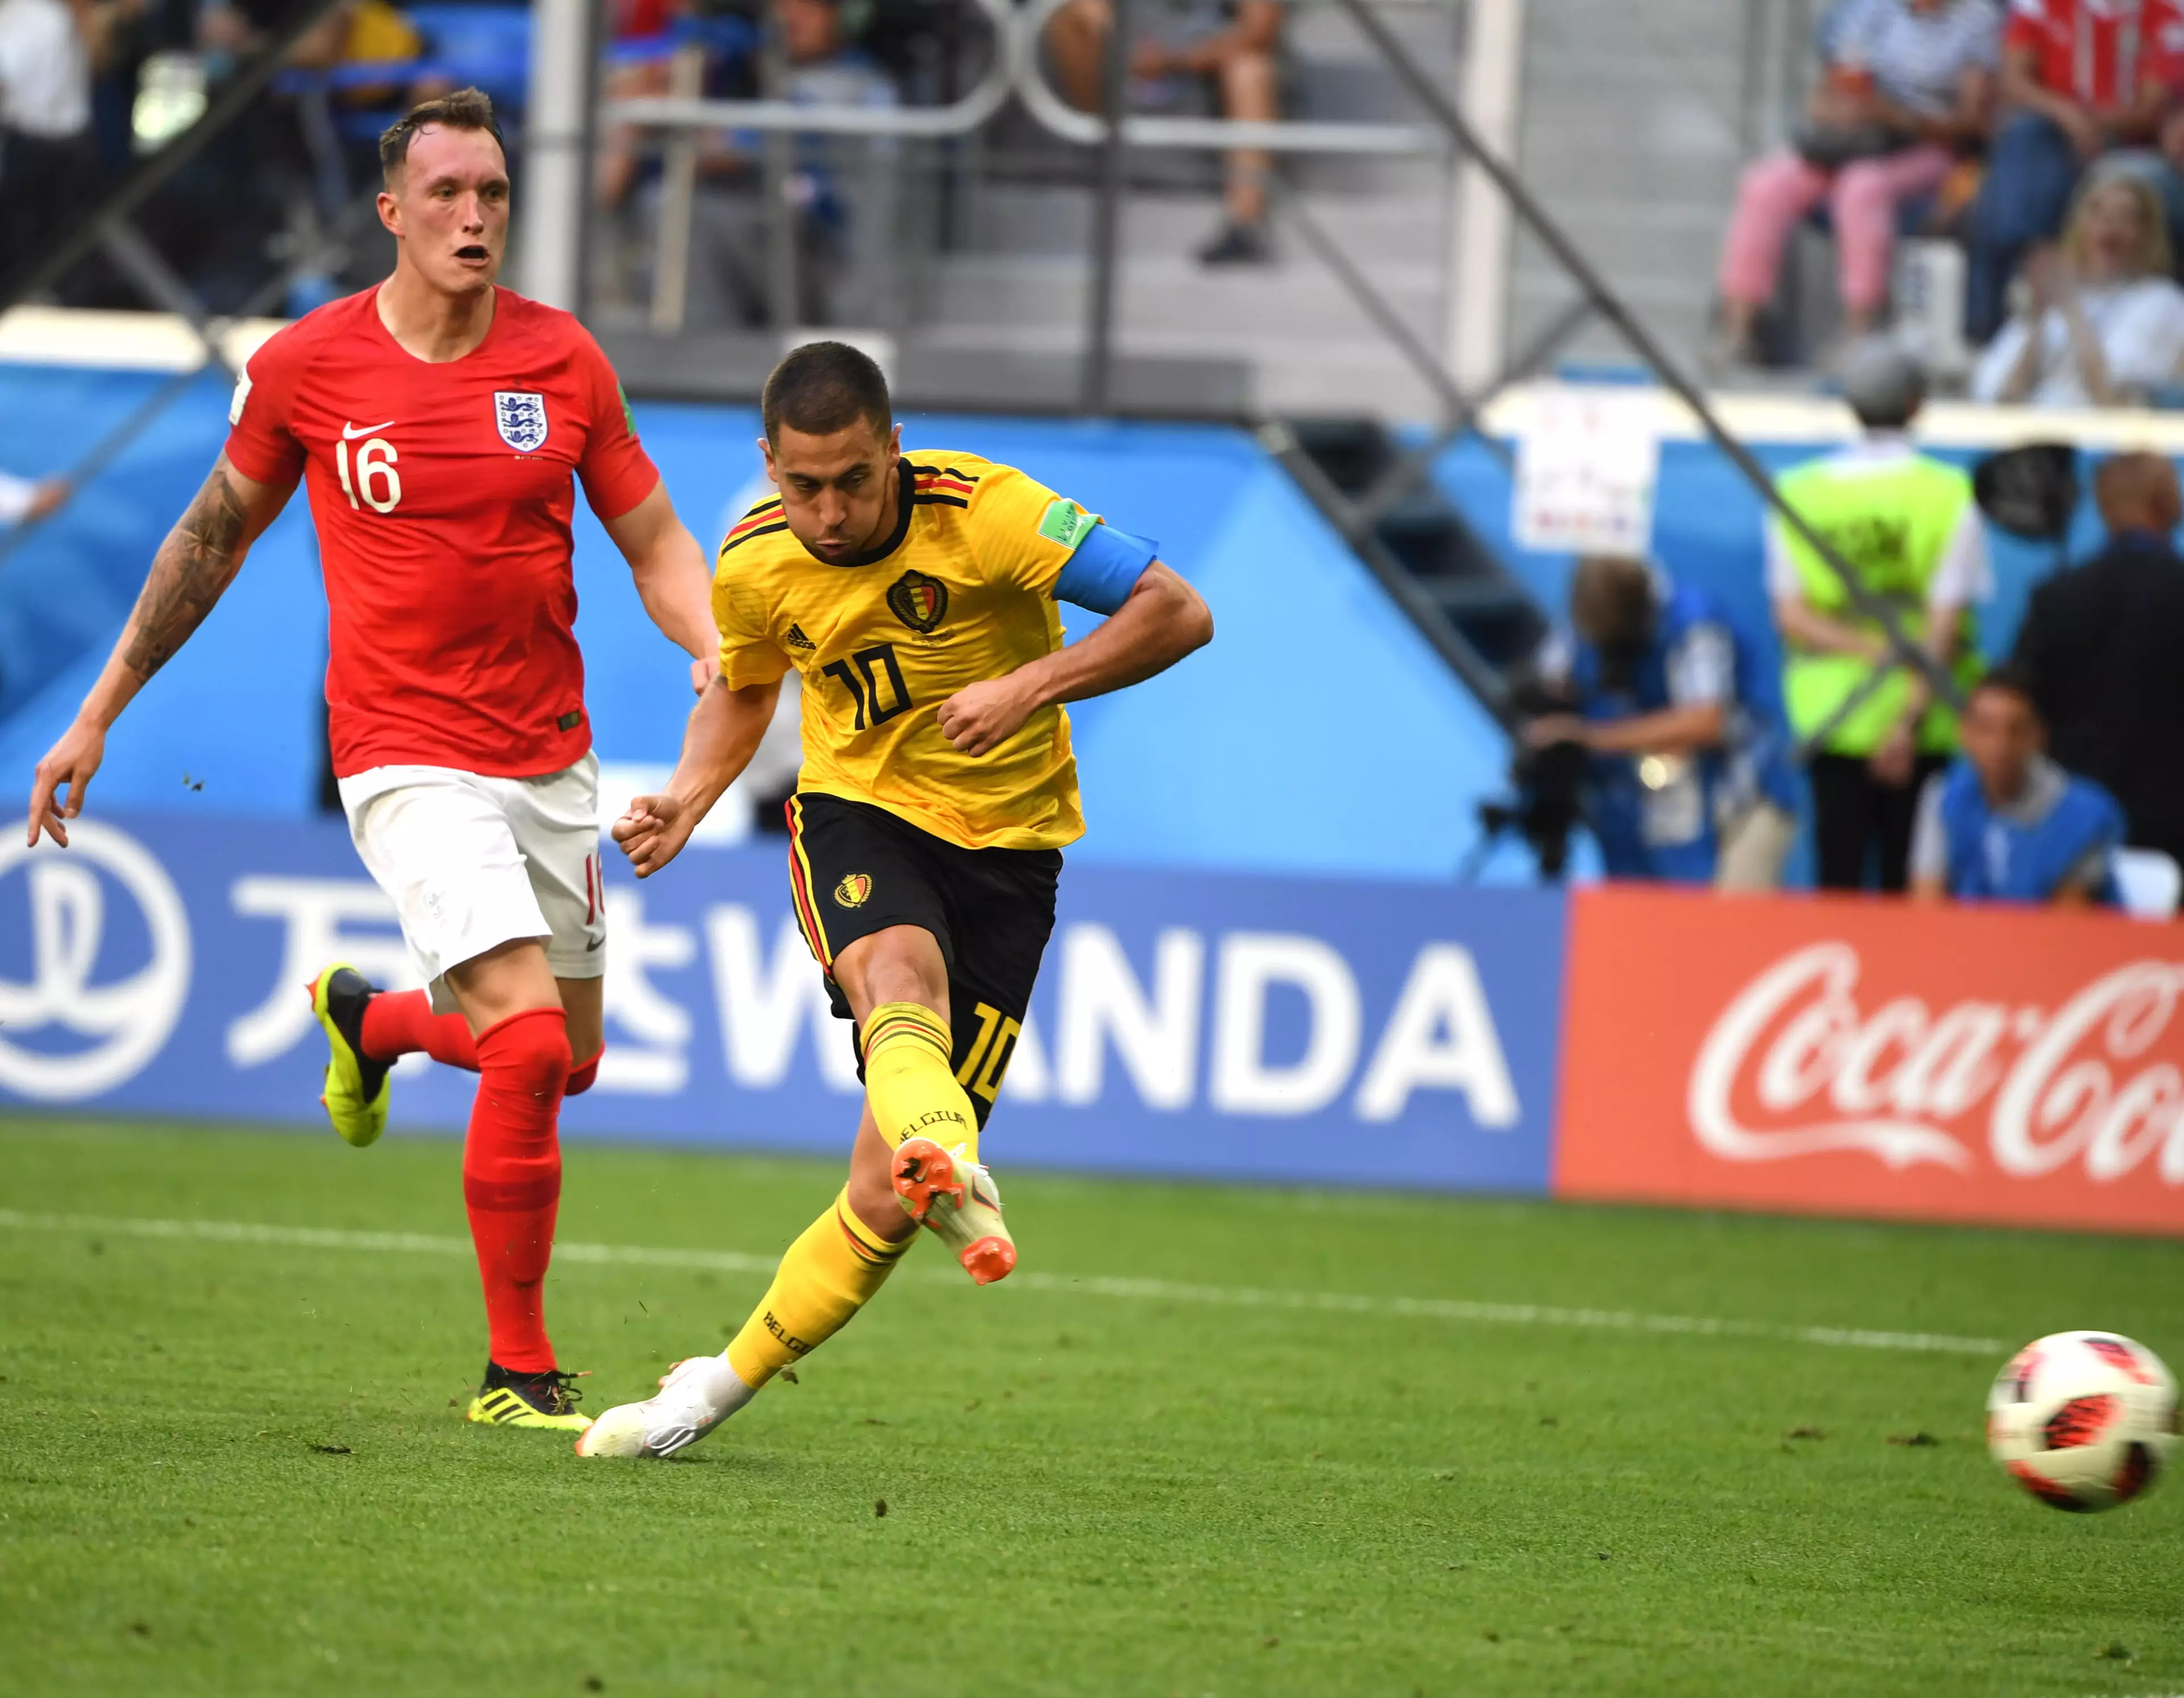 Hazard scores for Belgium at the World Cup. Image: PA